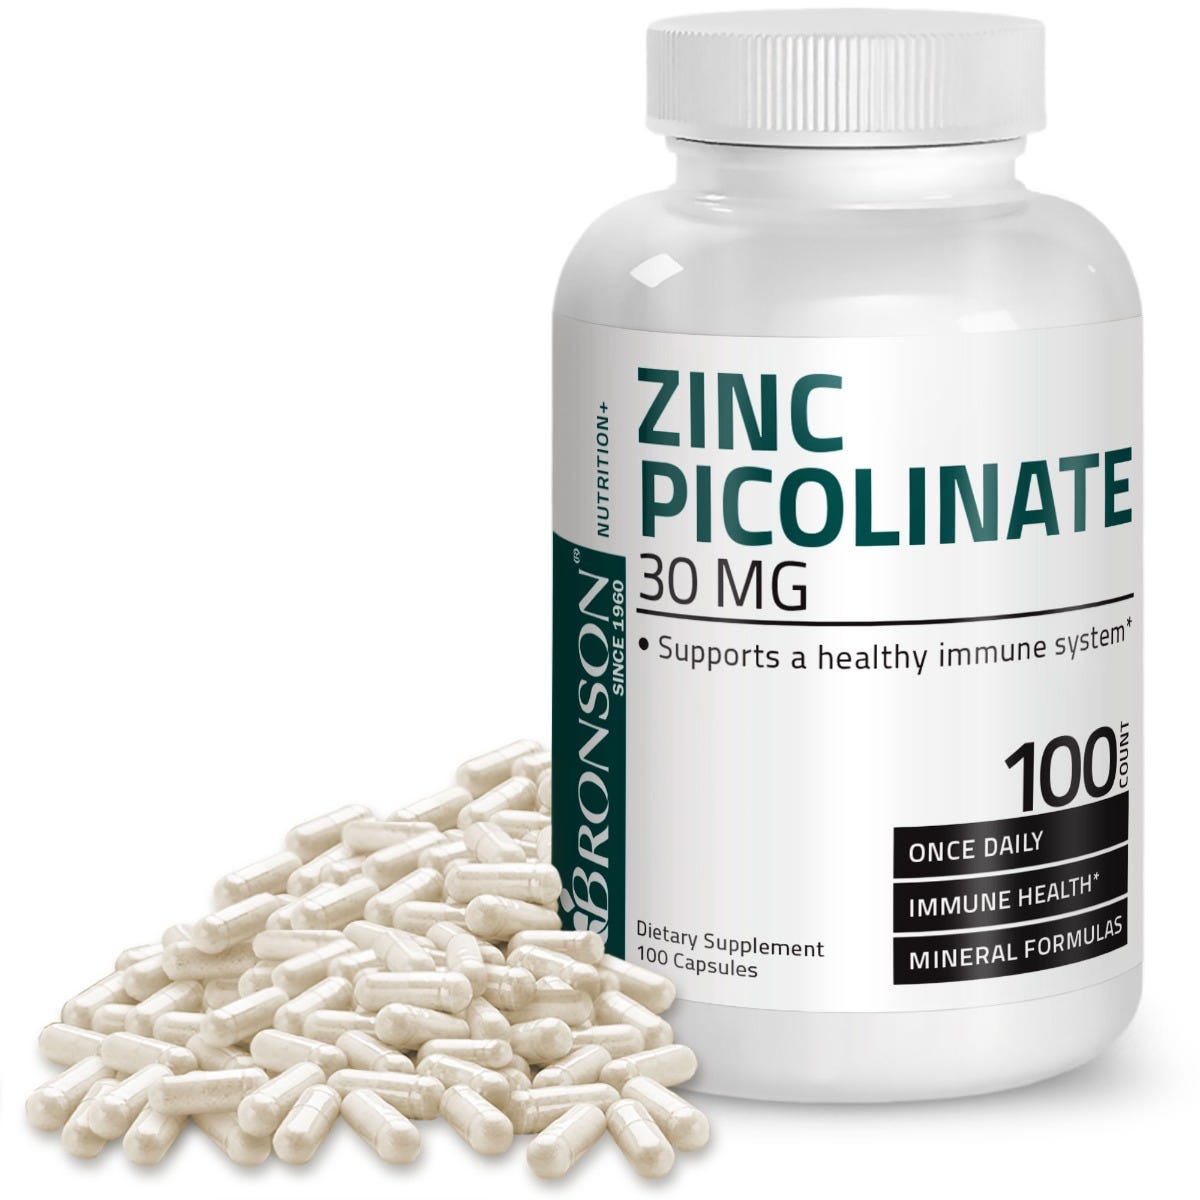 Zinc Picolinate - 30 mg - 100 Capsules view 2 of 6